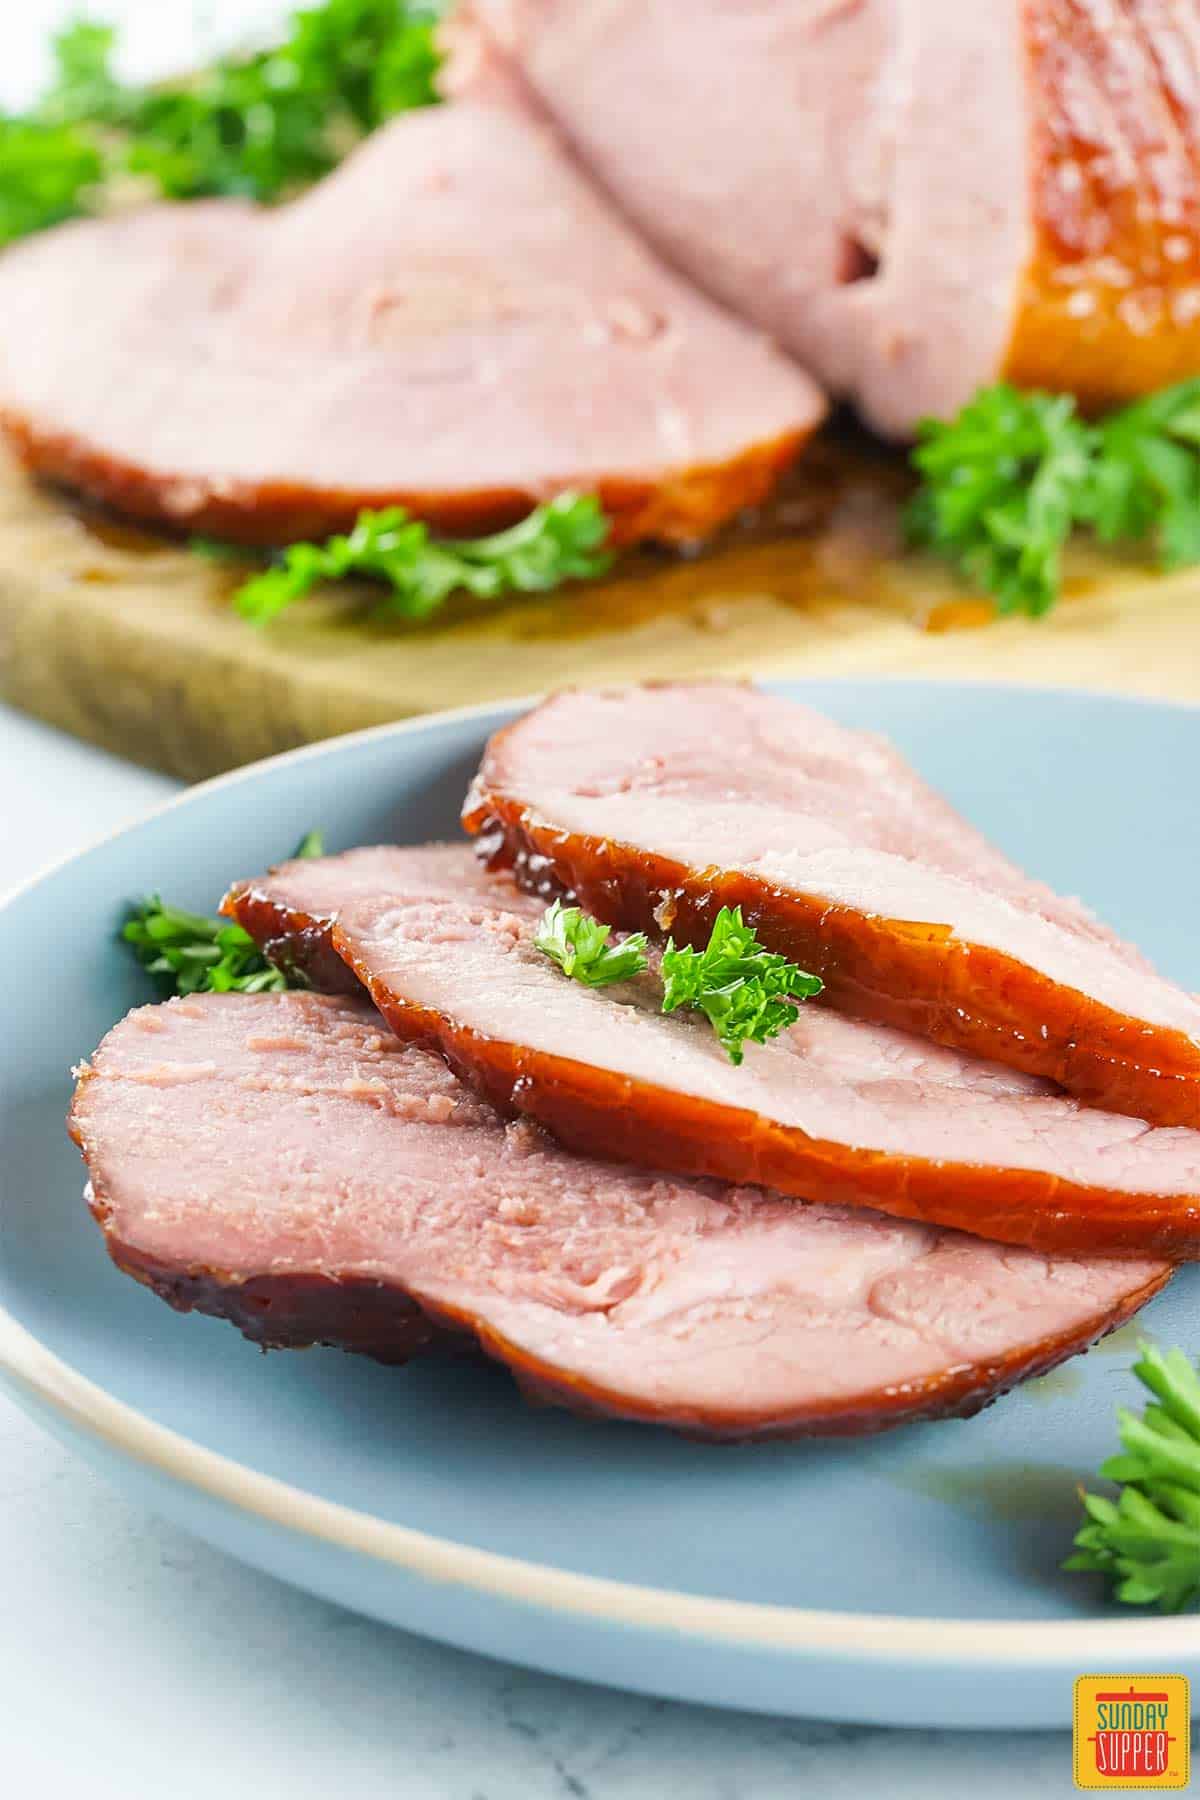 slices of smoked ham on a blue plate